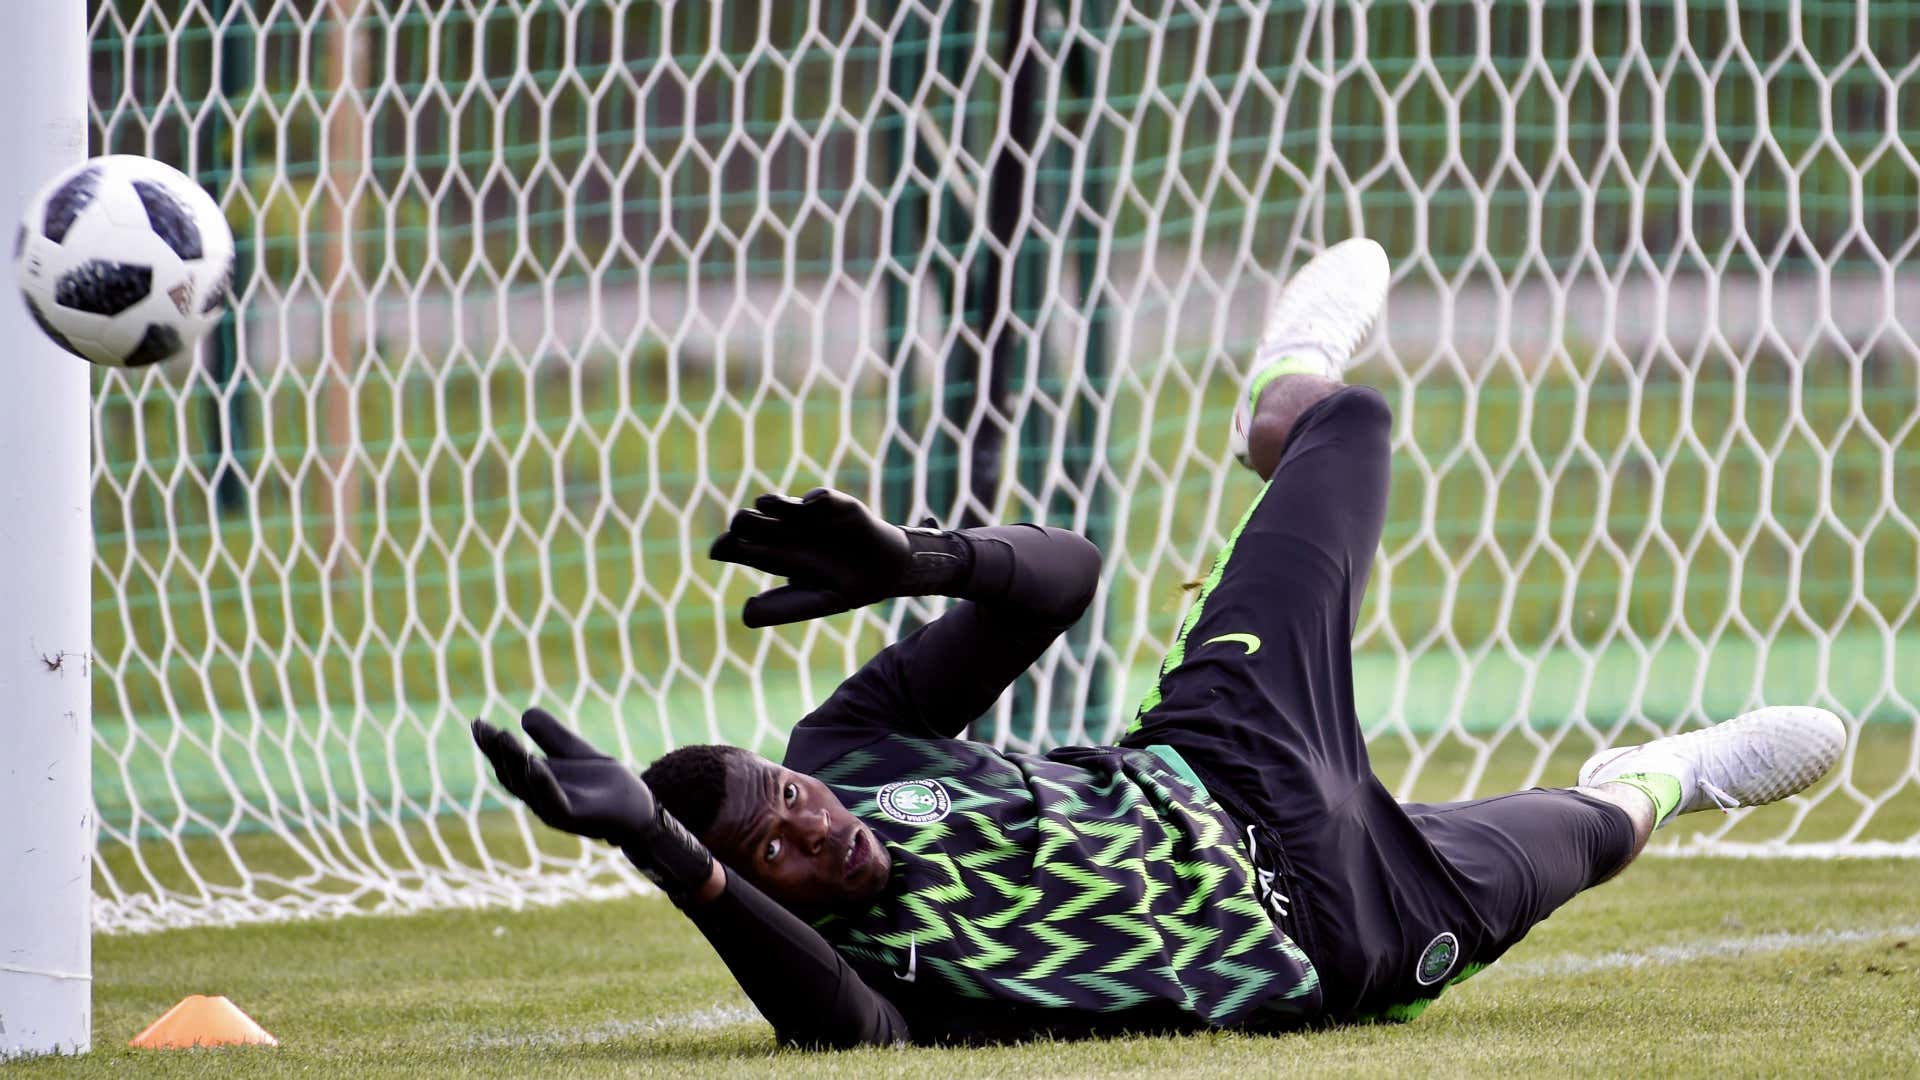 2022 World Cup qualifiers: Enyimba goalkeeper Noble replaces Uzoho in Nigeria squad